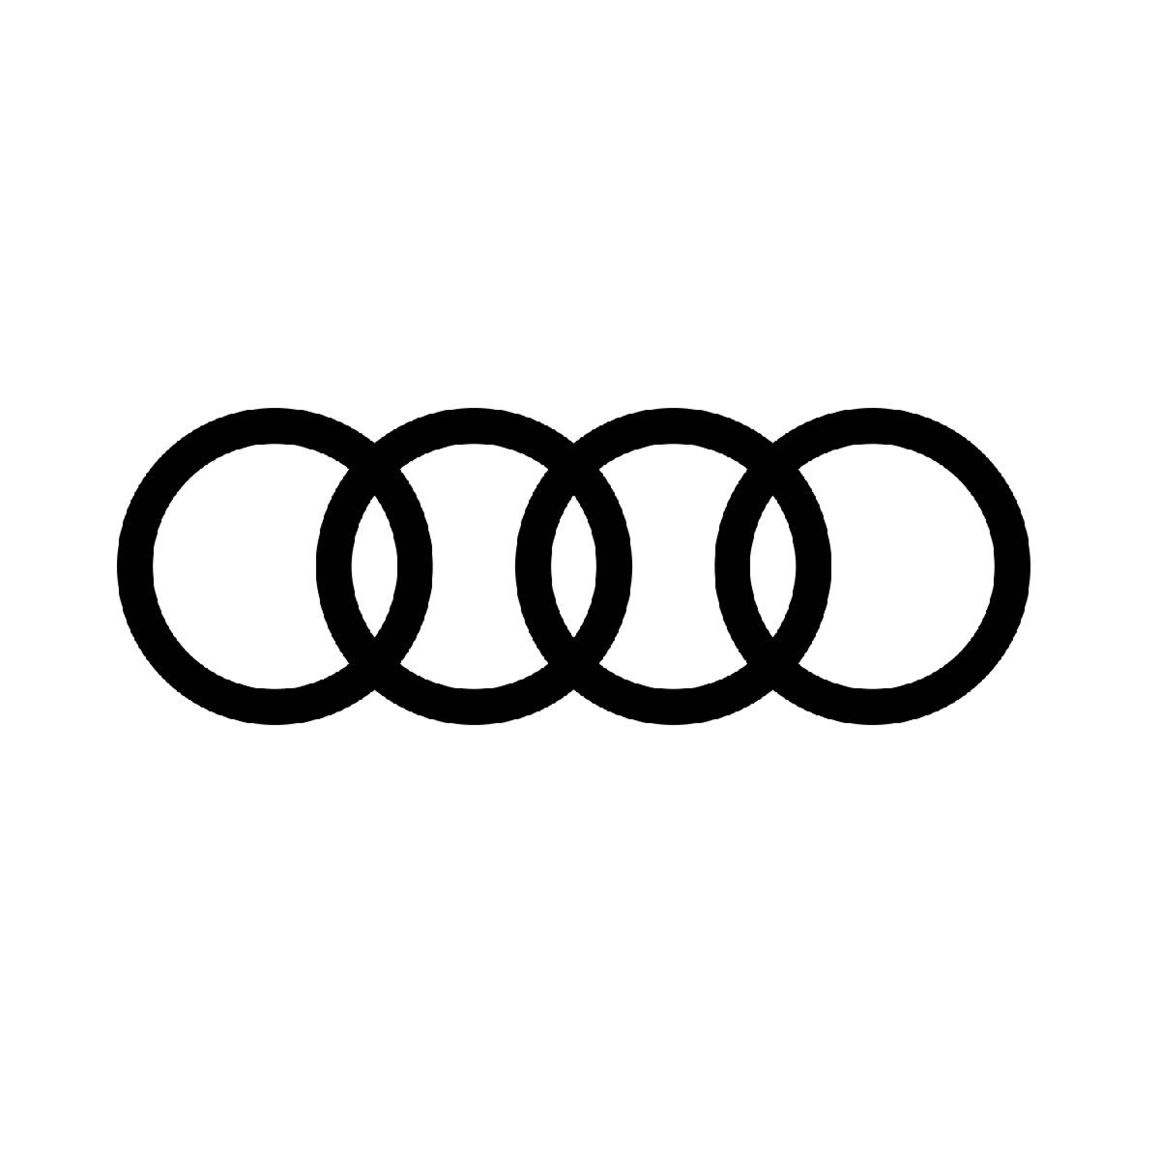 New Audi Models: What Does the Audi Logo Mean?